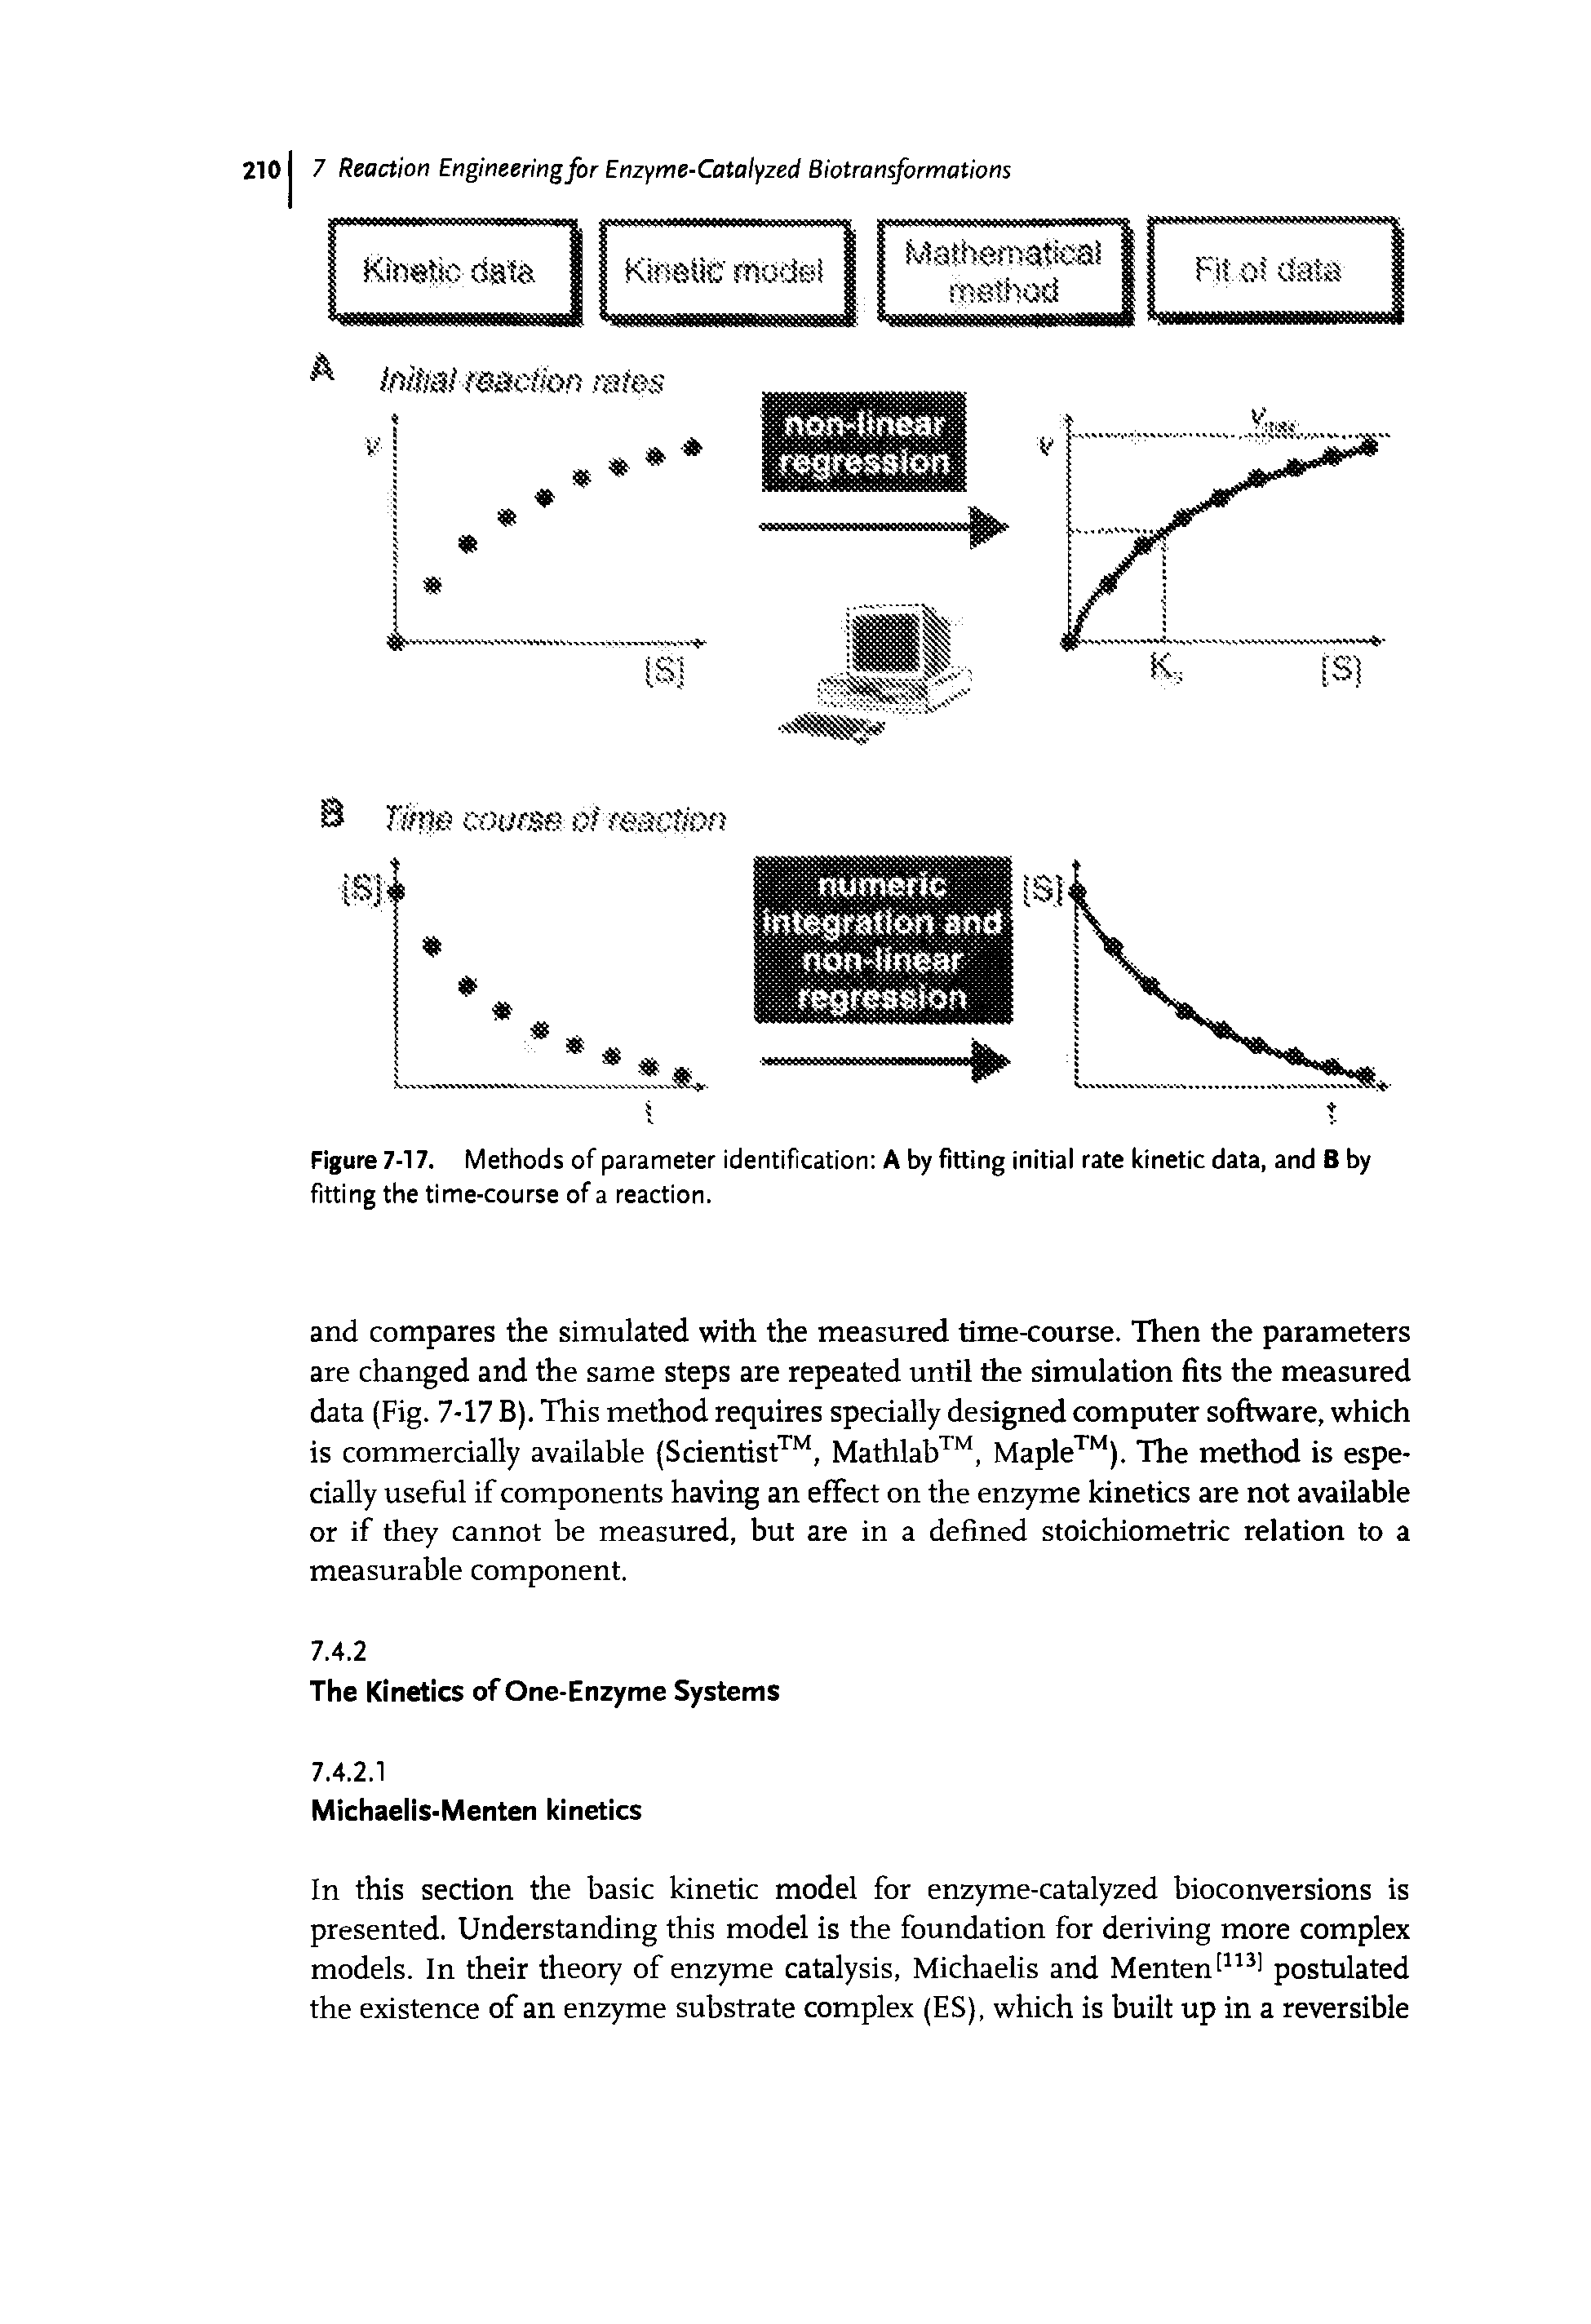 Figure 7-17. Methods of parameter identification A by fitting initial rate kinetic data, and B by fitting the time-course of a reaction.